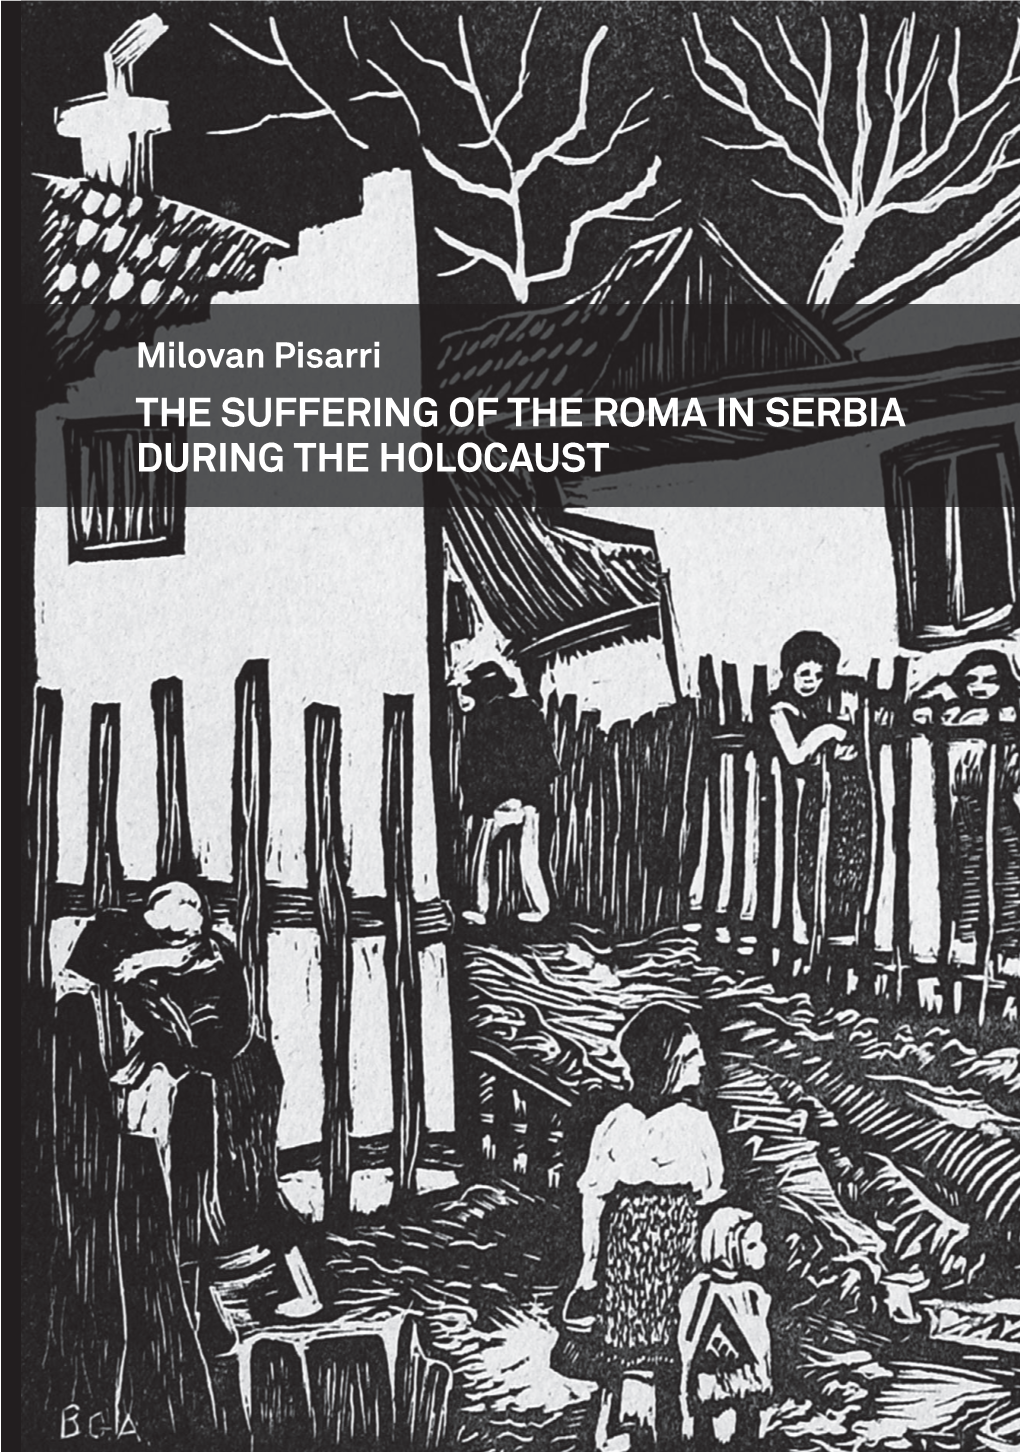 The Suffering of the Roma in Serbia During the Holocaust